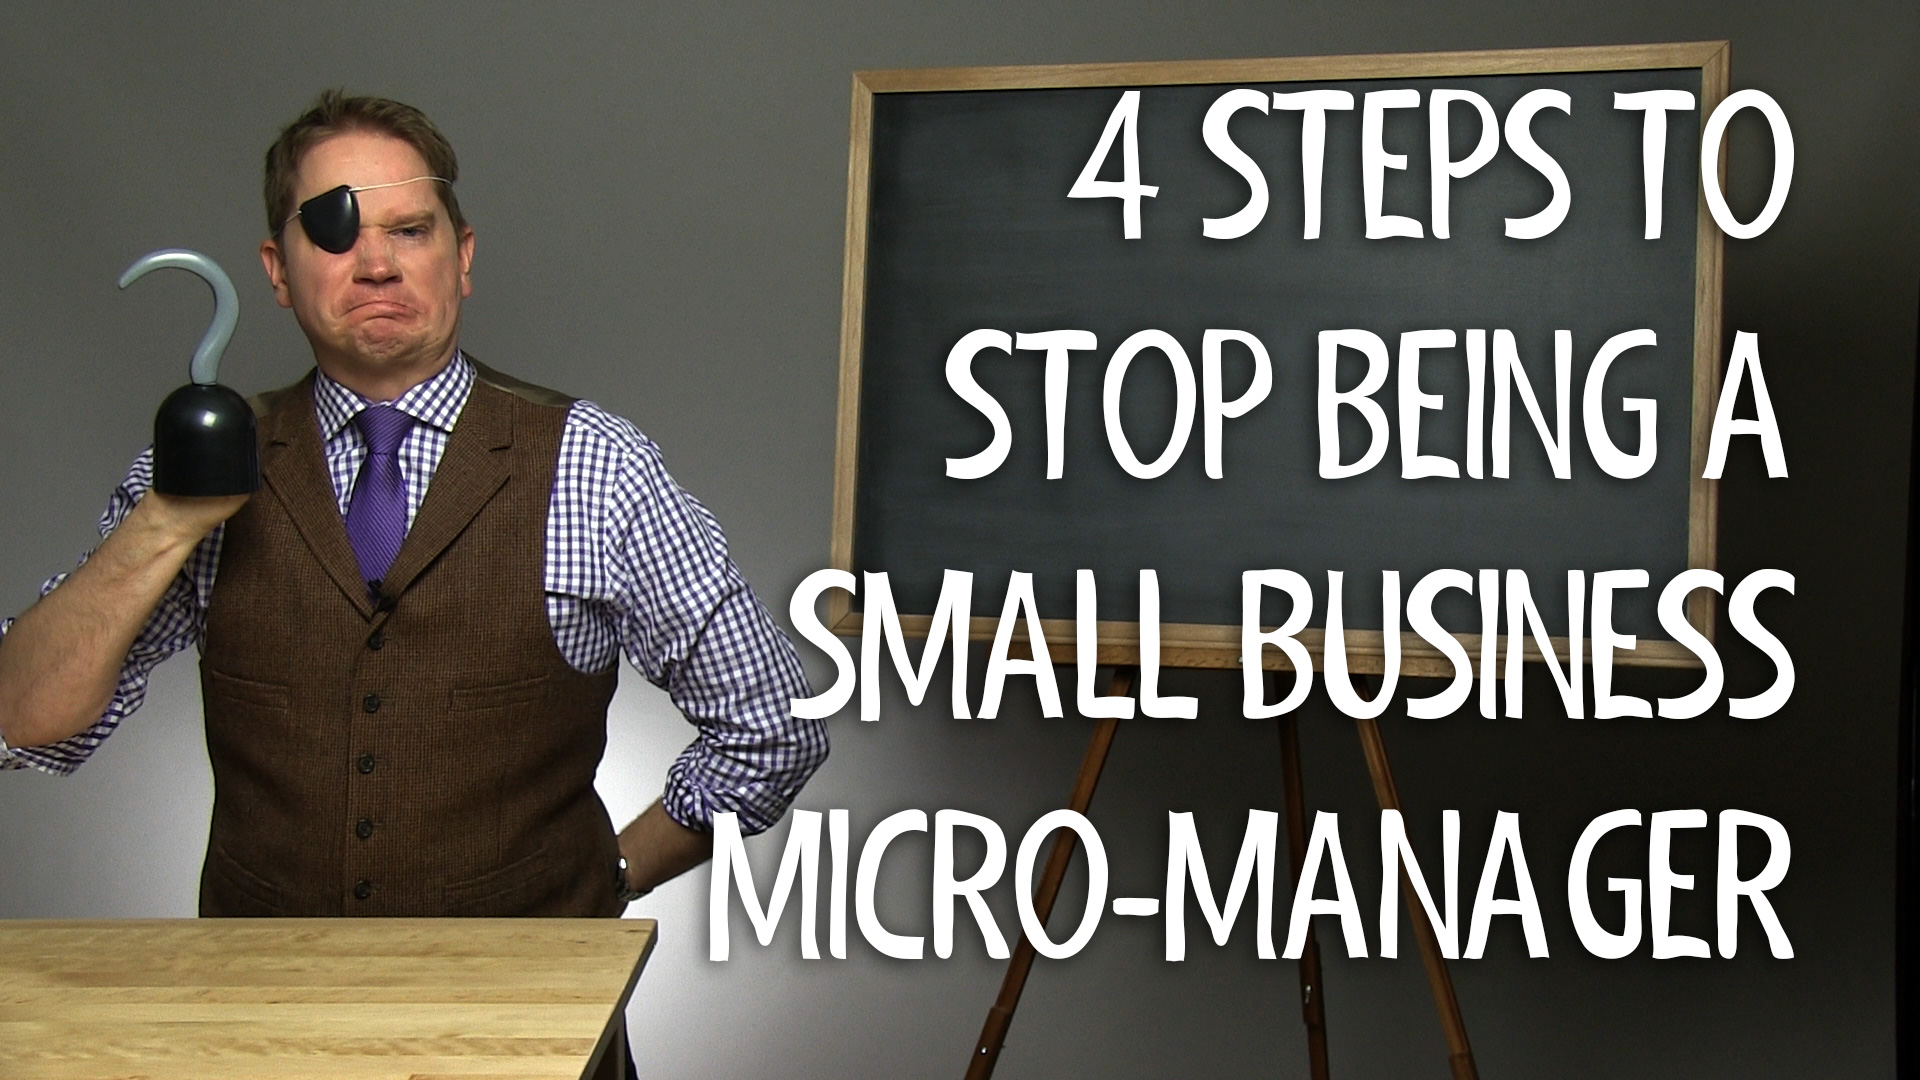 4 Steps to Stop Being a Small Business Micro-Manager – Do’s and Don’ts